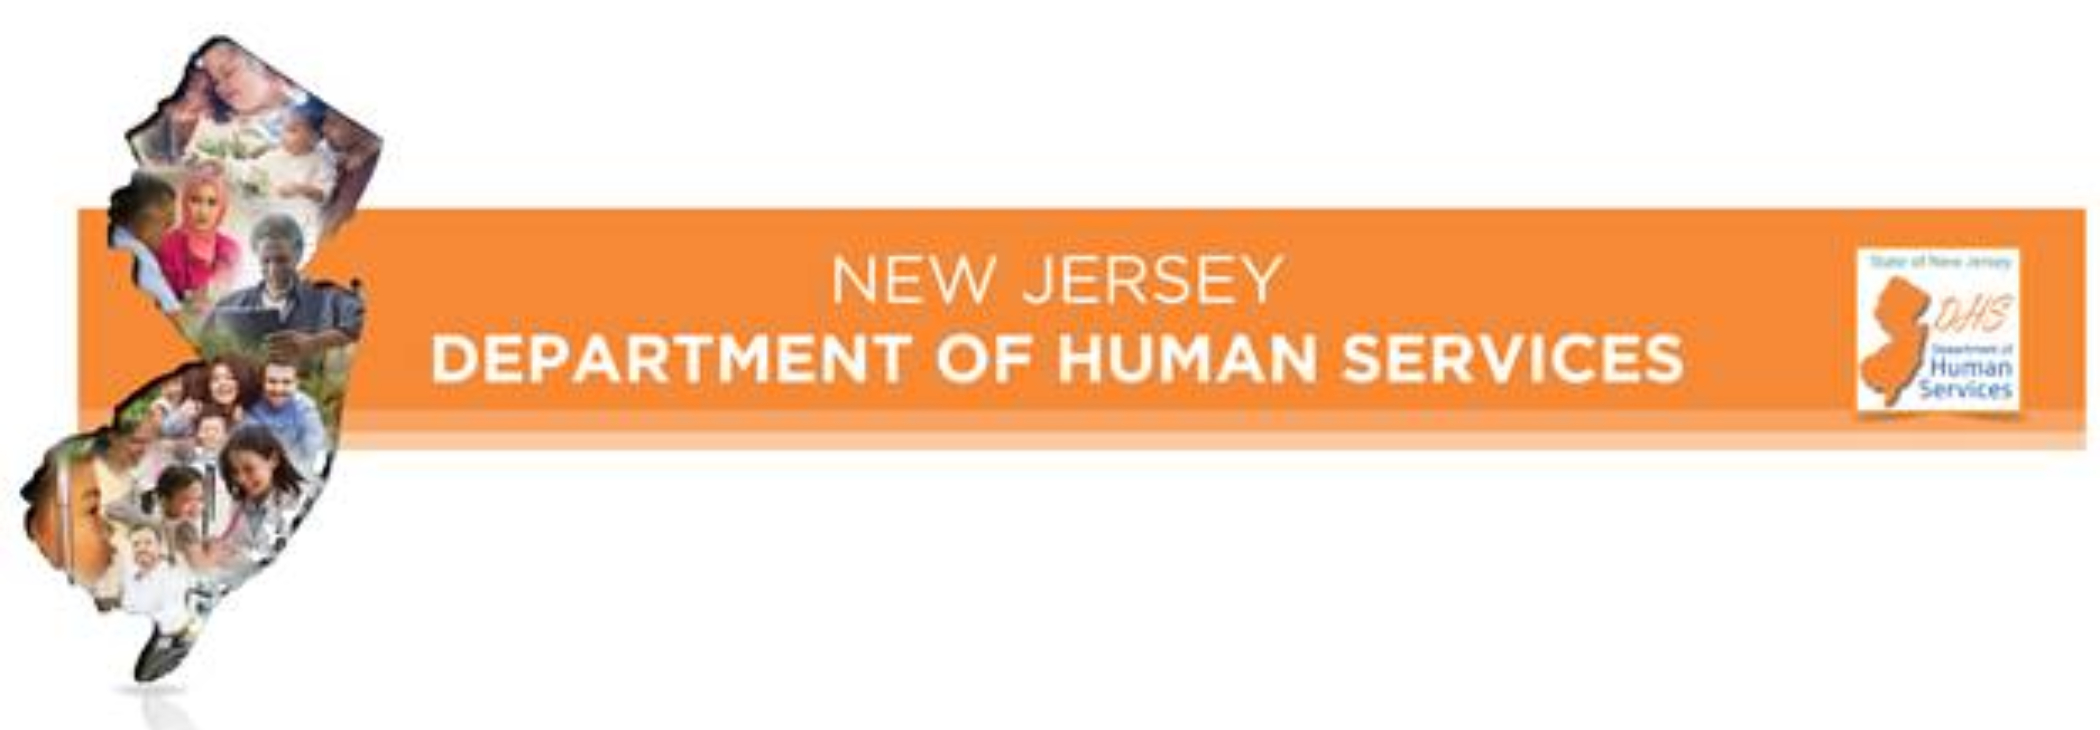 New Jersey Department of Human Service logo. Photo courtesy of New Jersey Department of Human Service